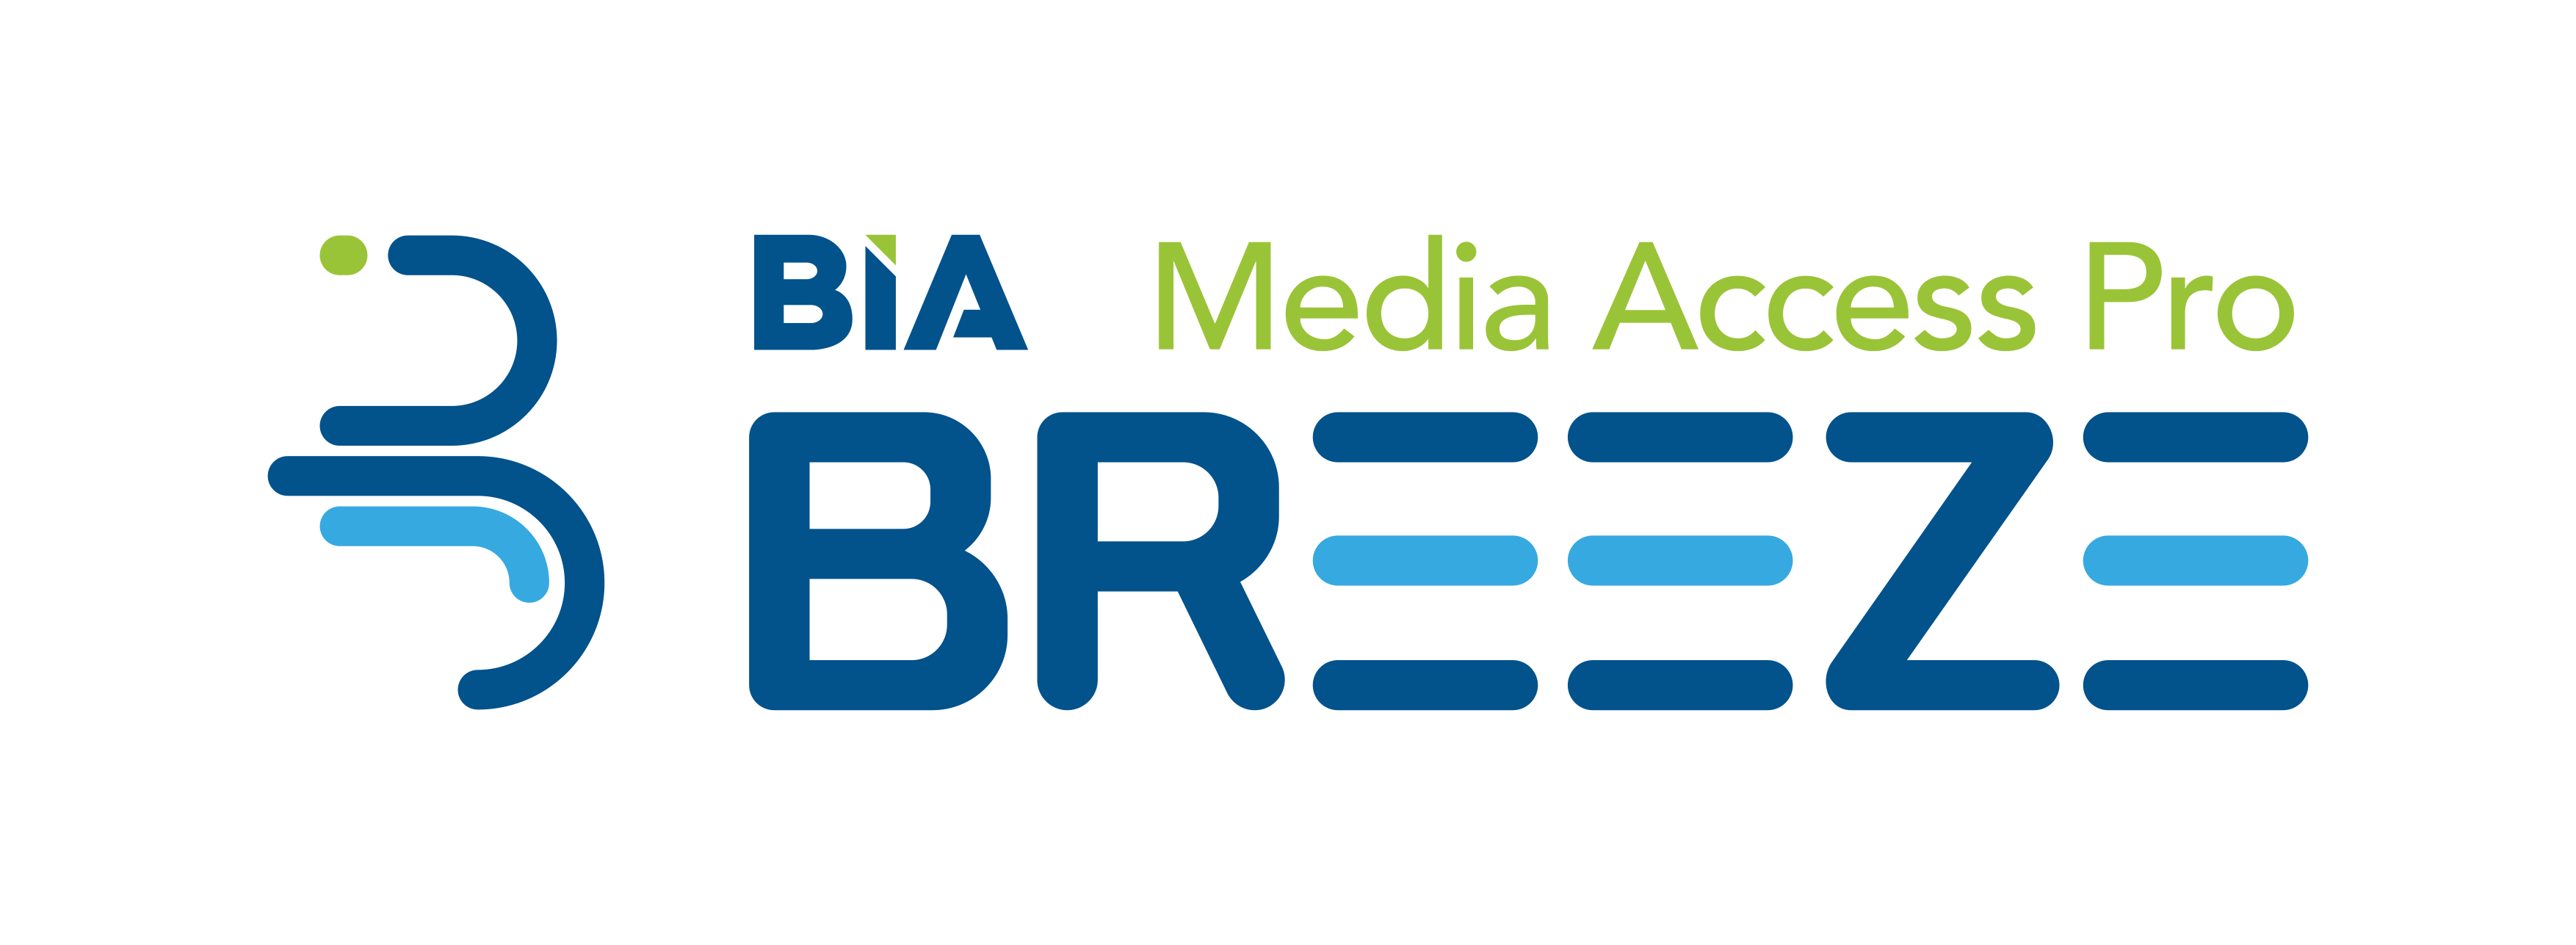 BIA Launches MAPro Breeze, A Web Application Built On The Foundation Of MEDIA Access Pro™